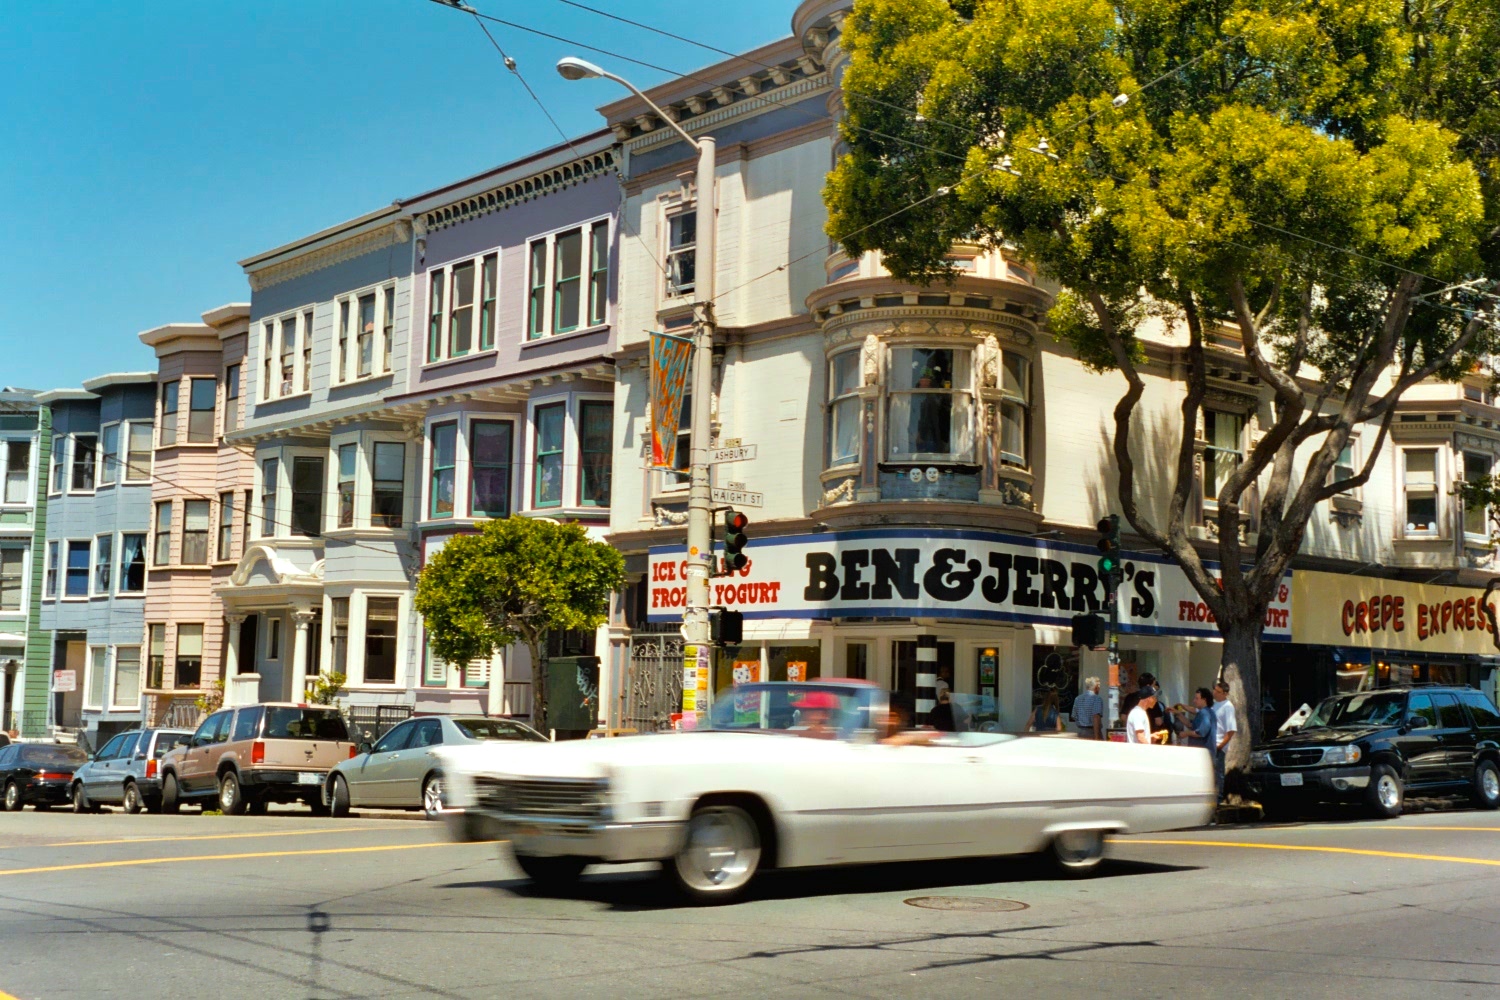 Haight-Ashbury street corner in San Francisco, with Ben & Jerry’s and a large, white cadillac convertible cruising through.